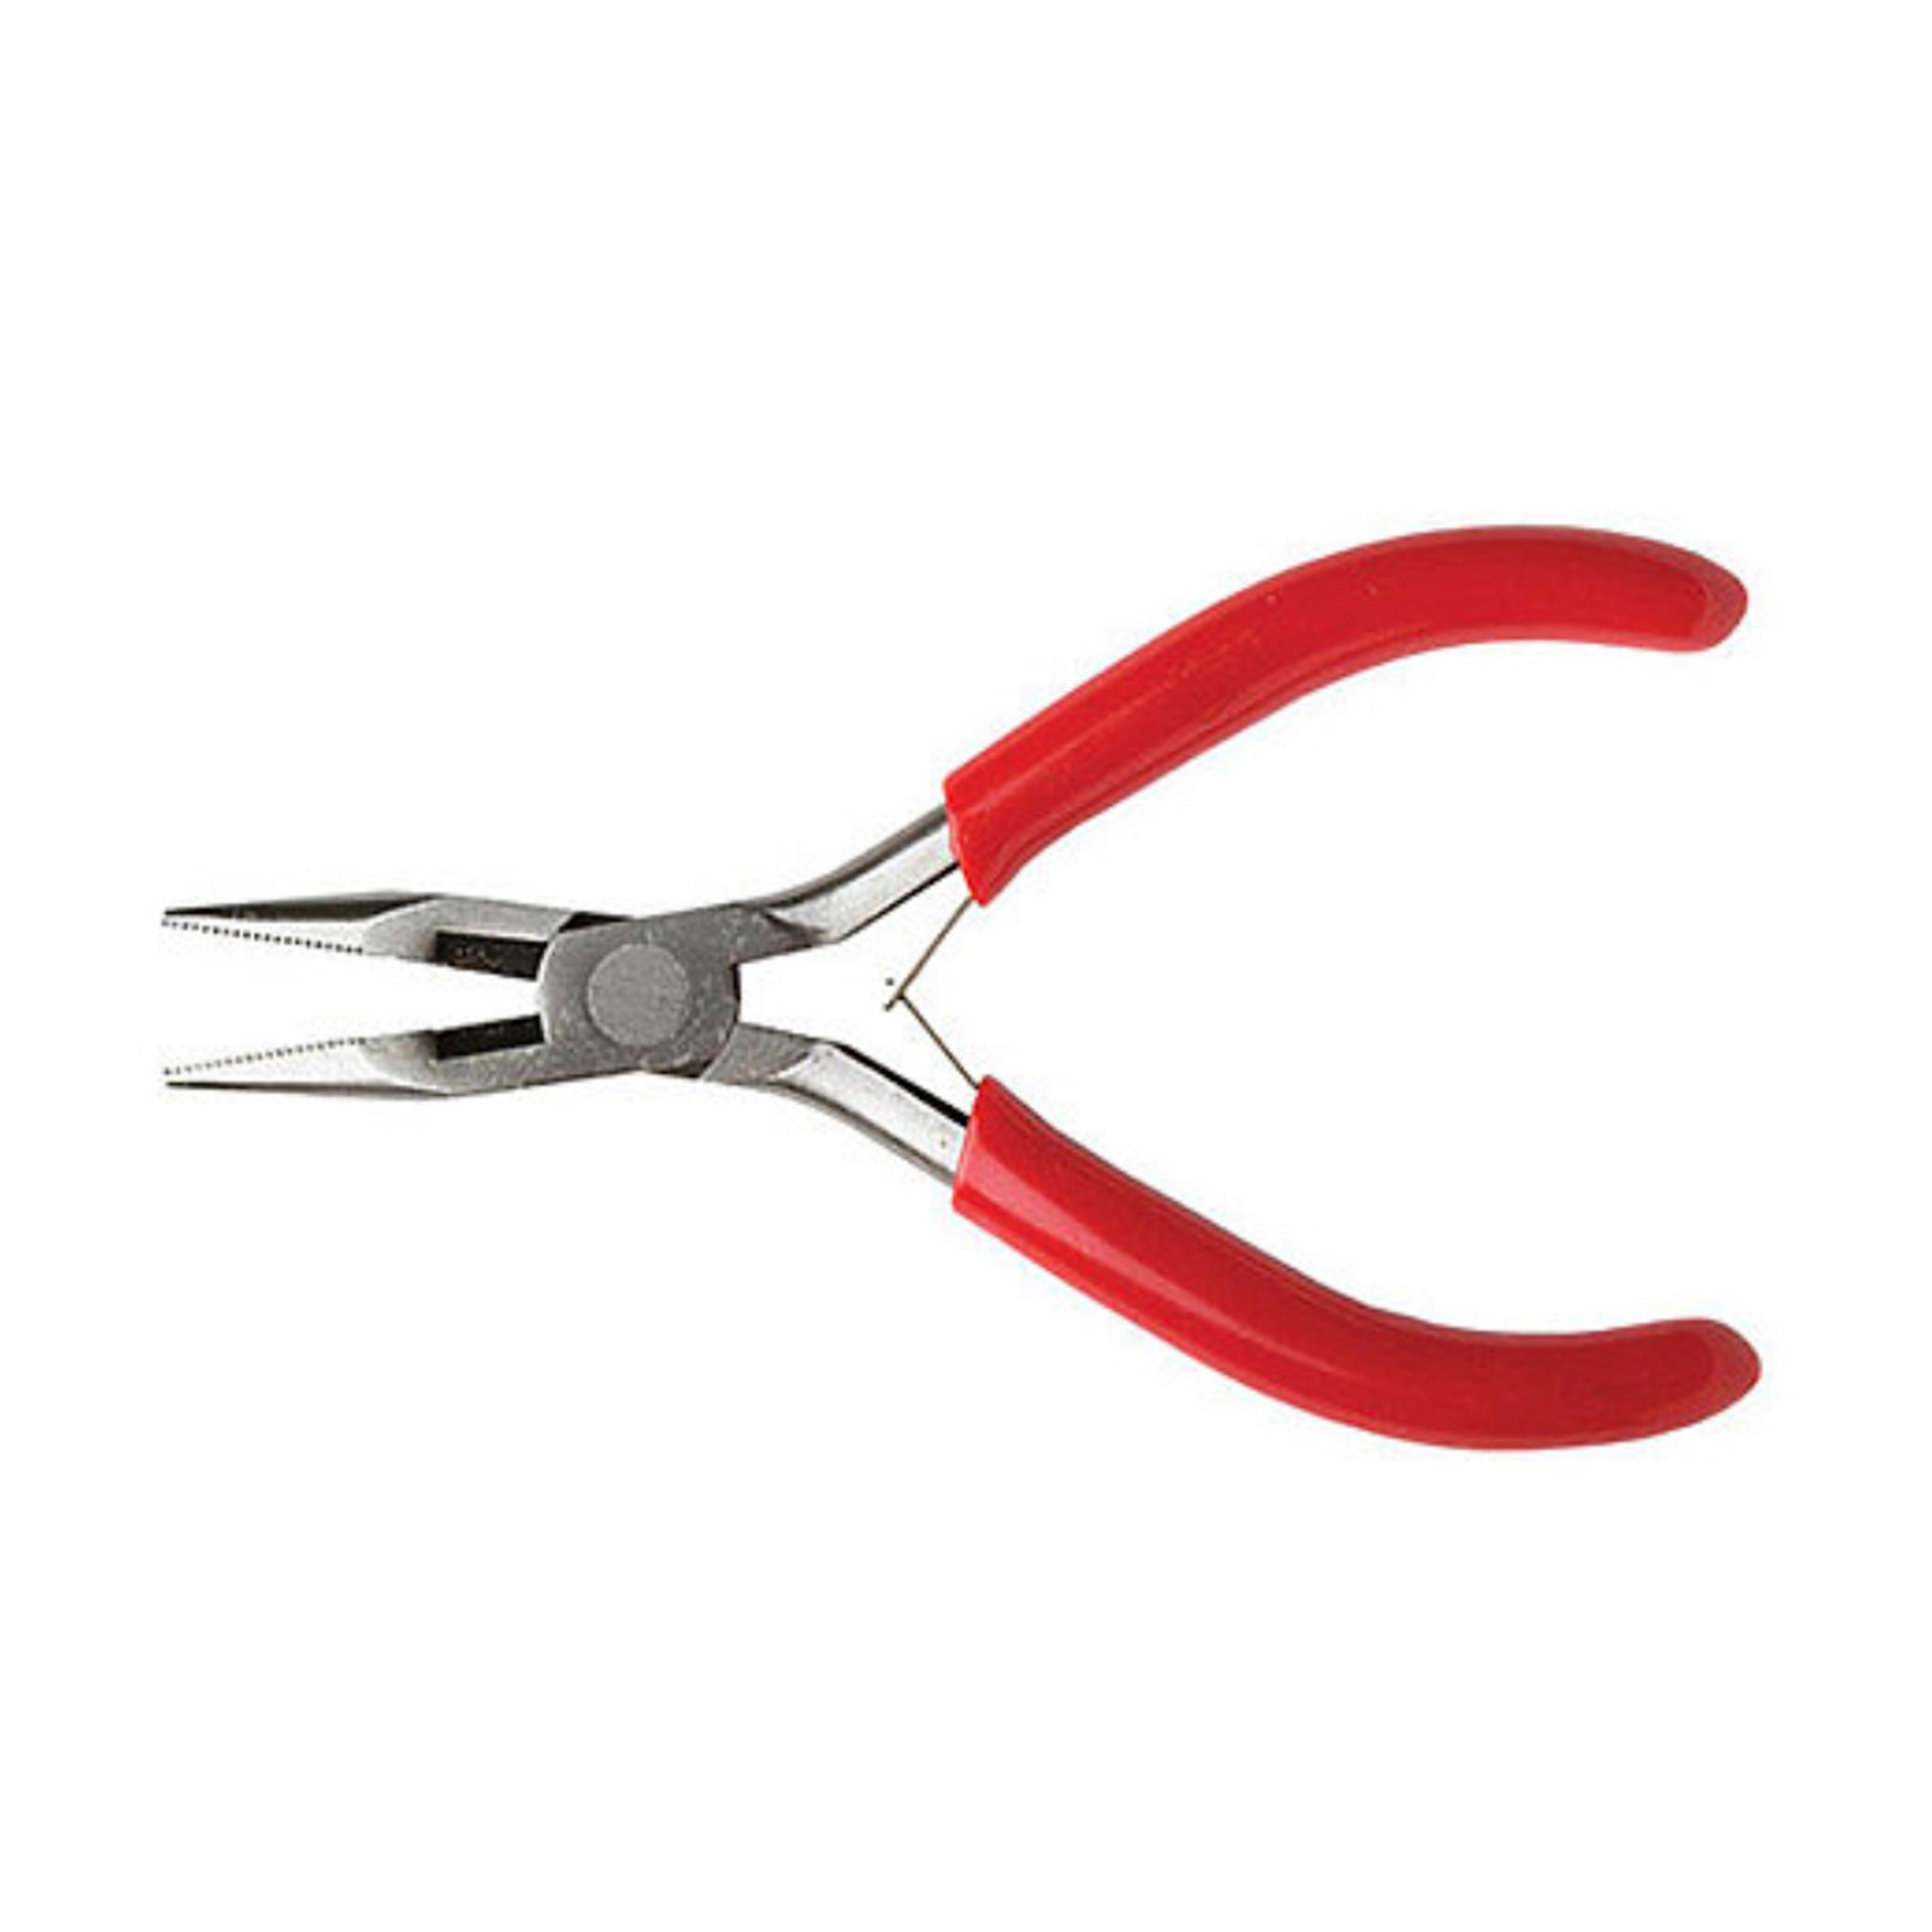 Excel Needle Nose Pliers with Wire Cutter - 5 inch - by Excel - K. A. Artist Shop